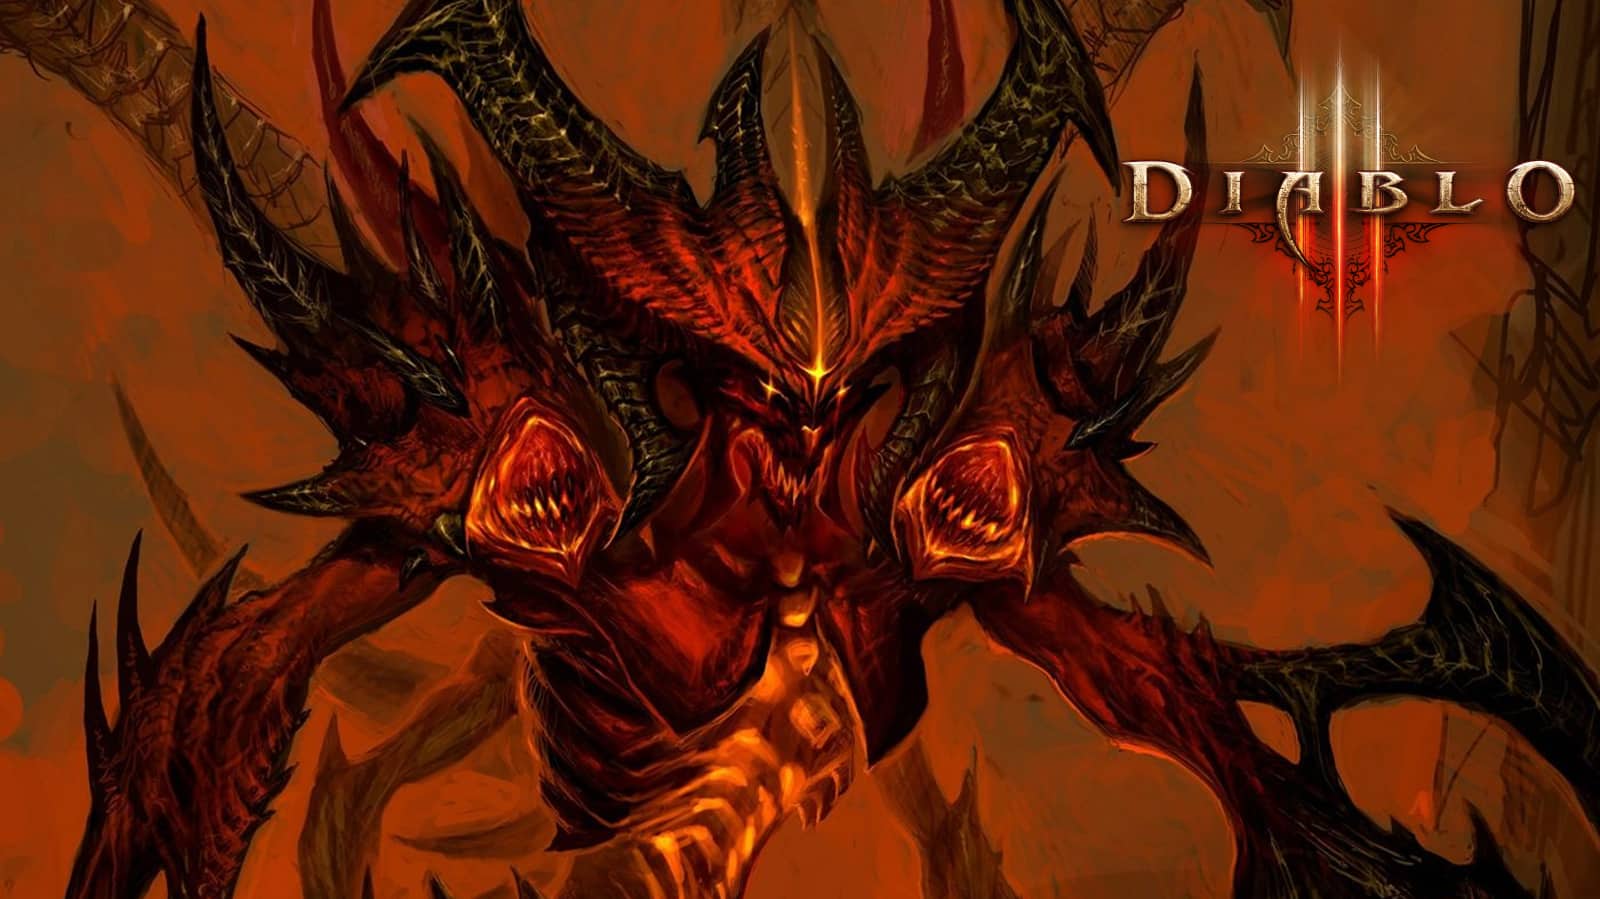 Diablo 3 red demon with spines looks at camera